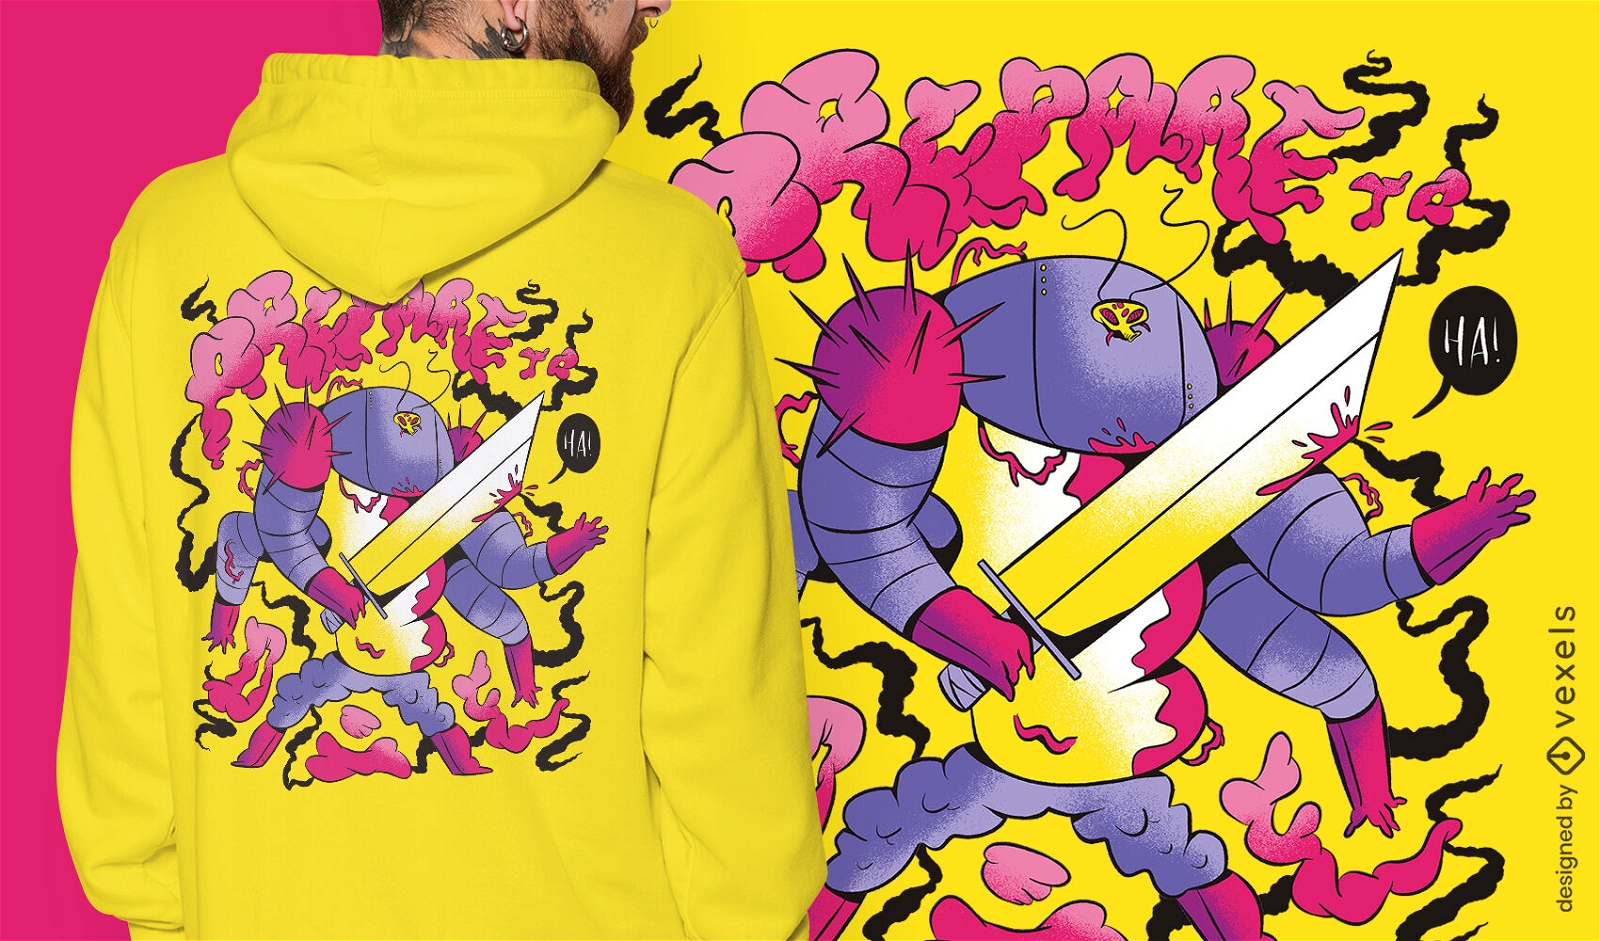 Insect warrior with sword t-shirt psd